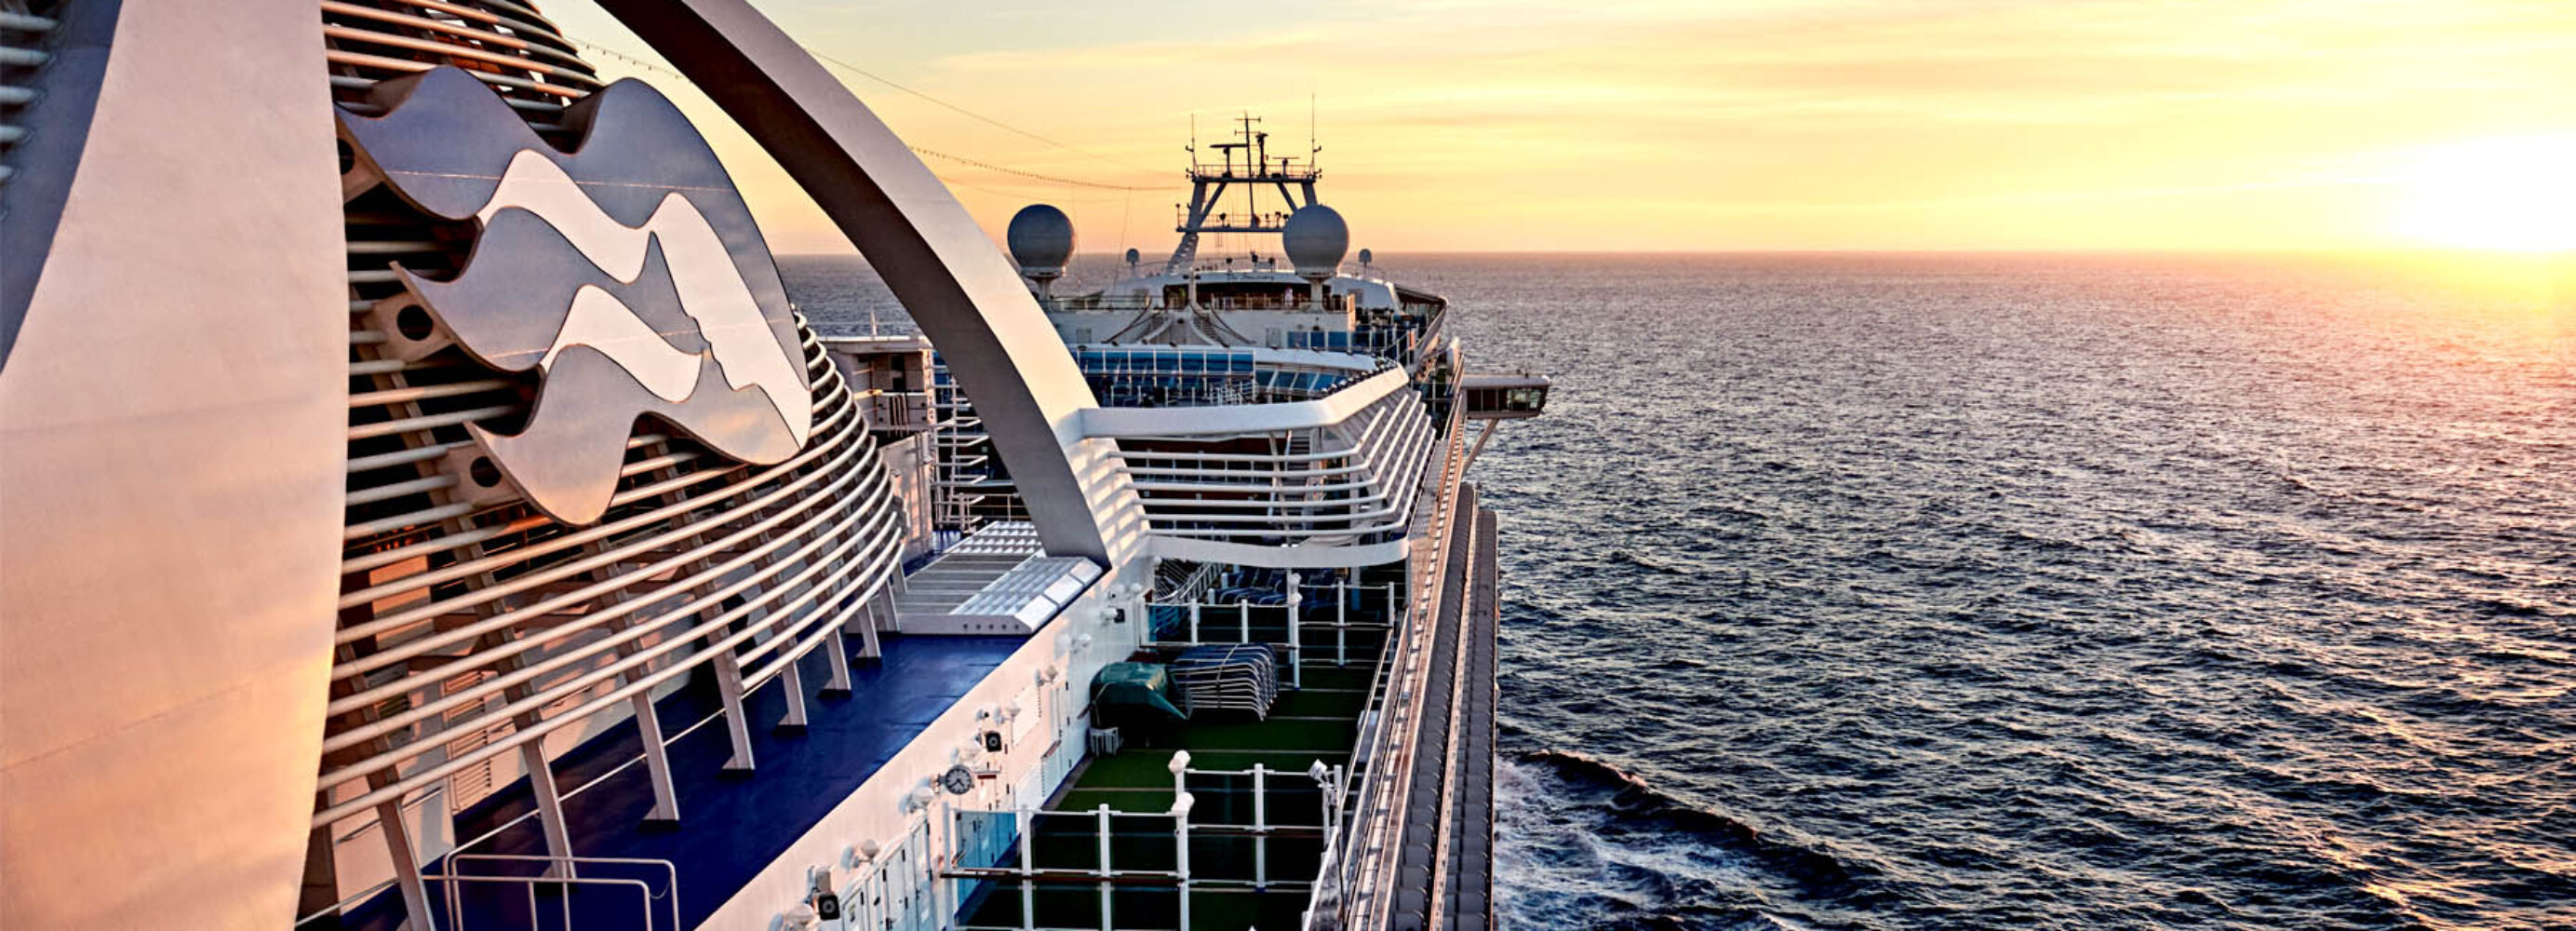 Here's Cruise Passenger's ultimate guide to princess Cruises